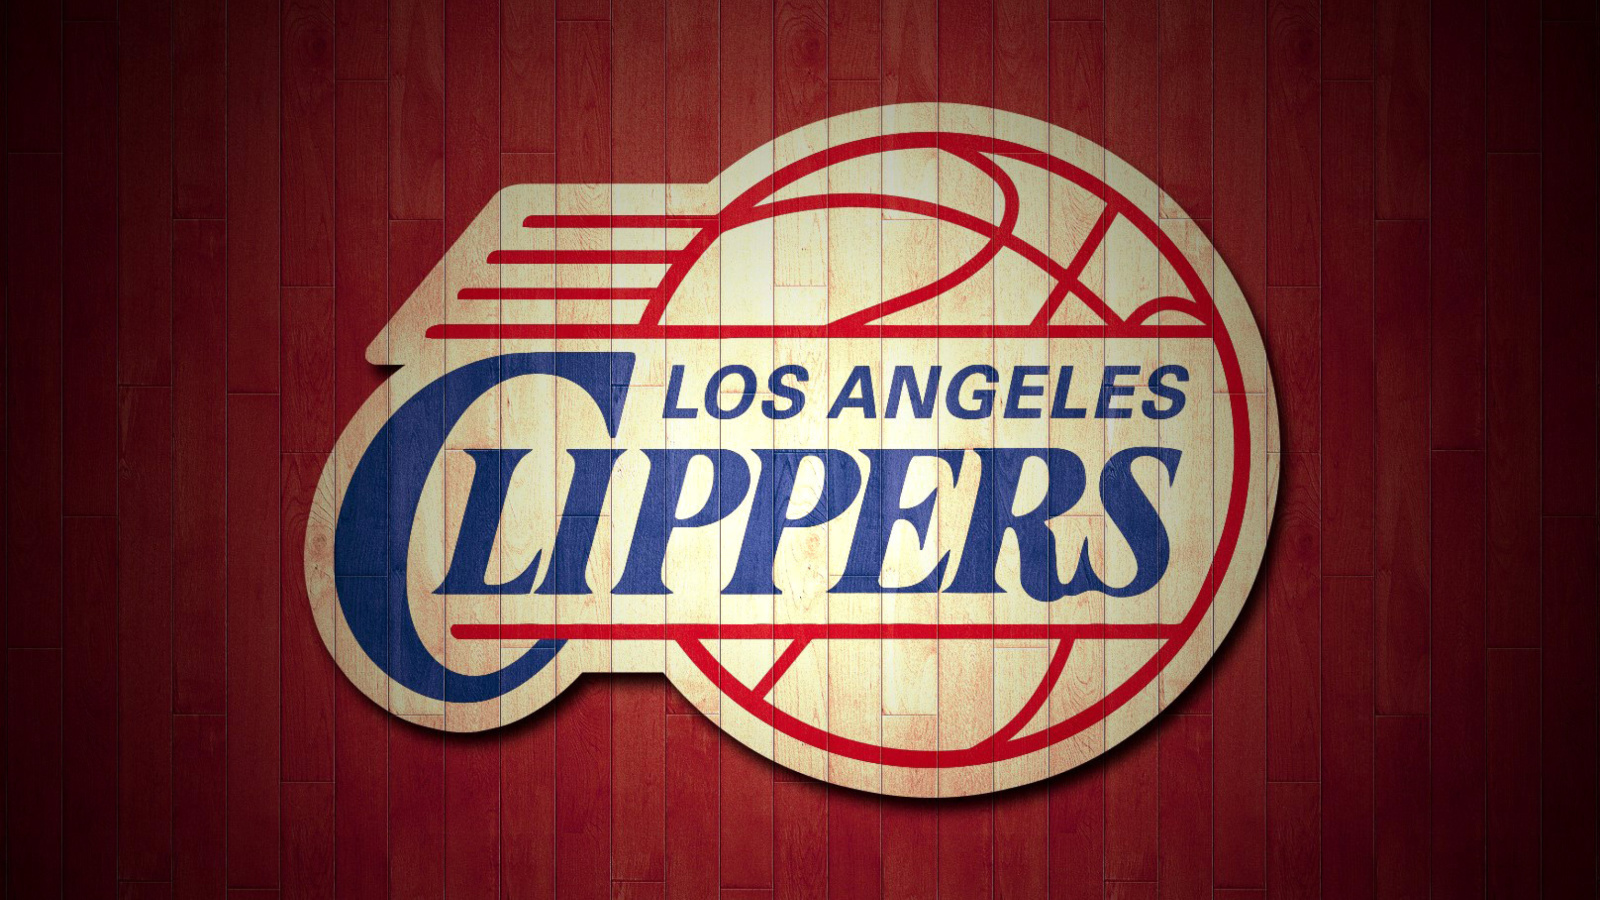 Los Angeles Clippers Logo wallpaper 1600x900